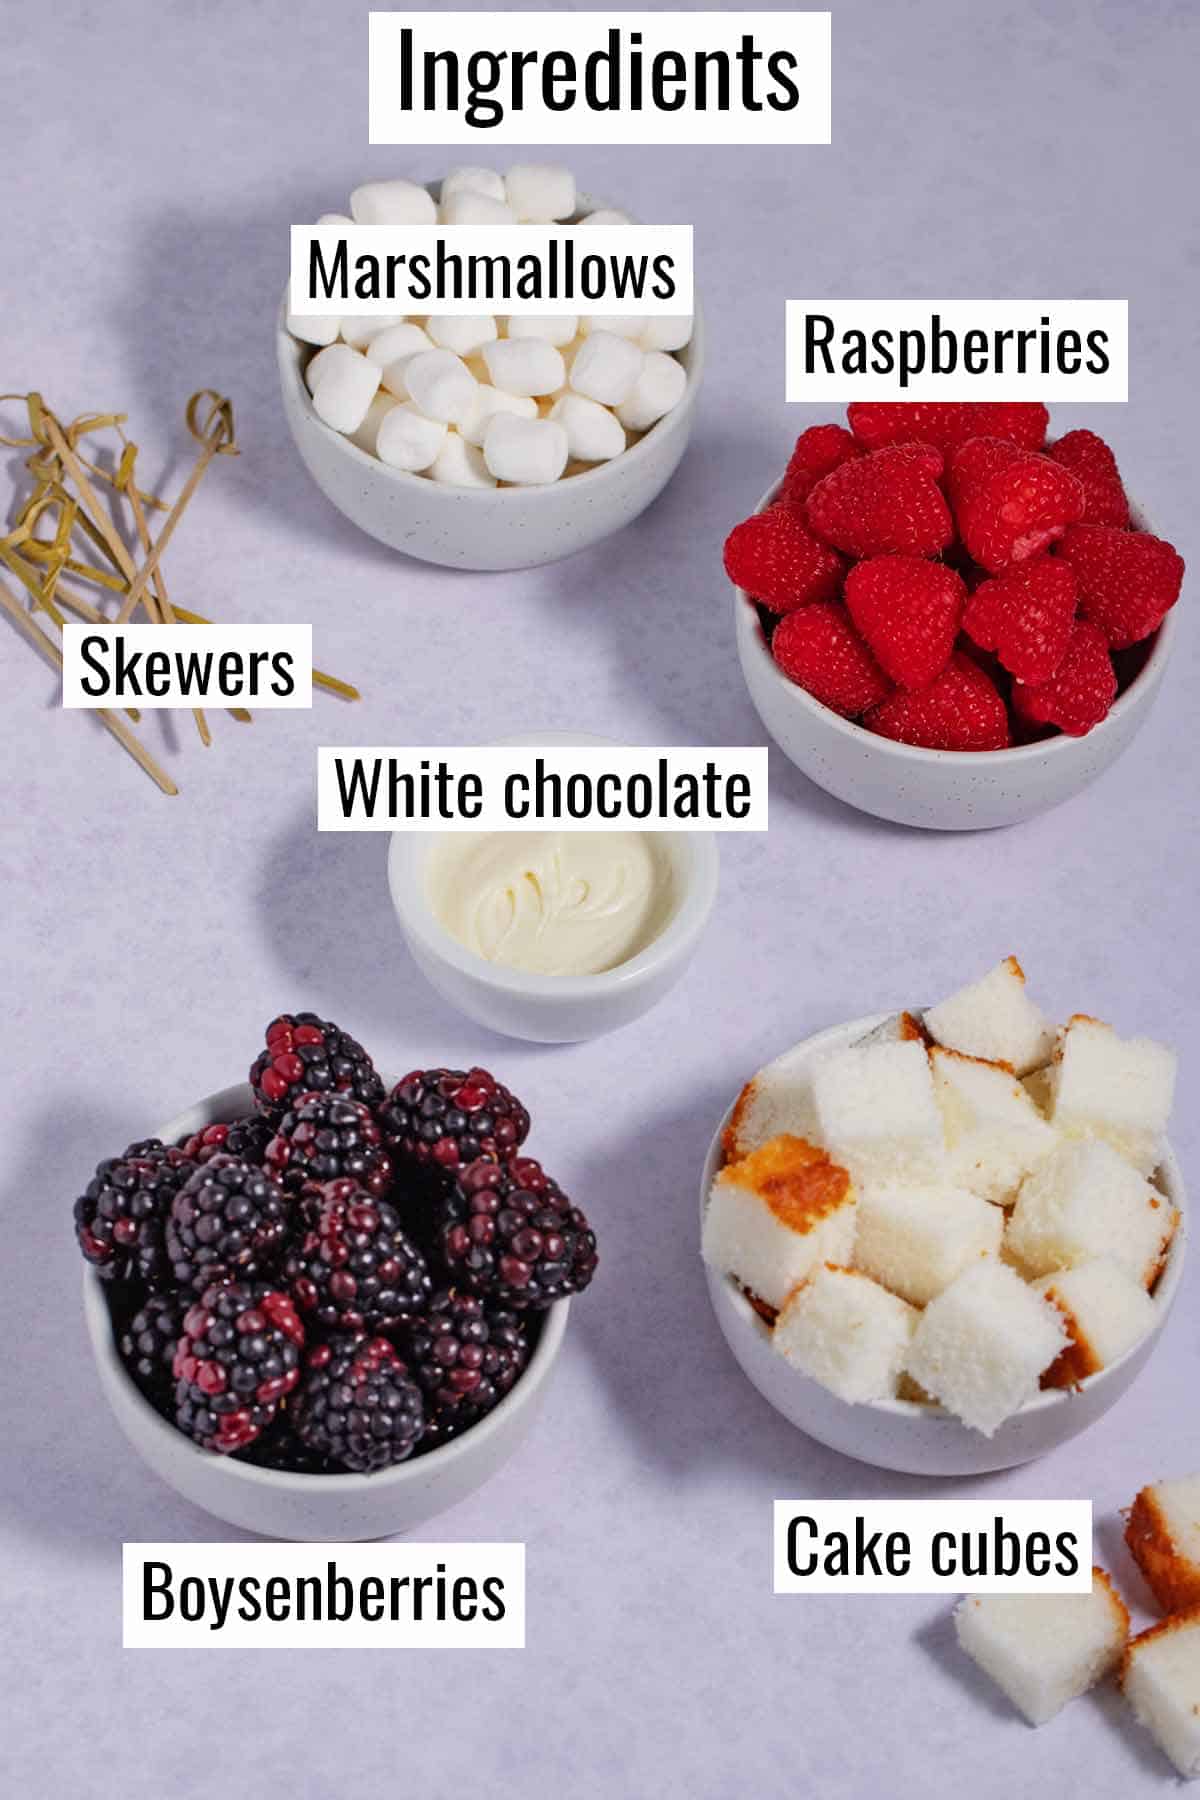 Ingredients for dessert skewers. Bowls of raspberries, boysenberries, cake cubes, marshmallows, and melted white chocolate.